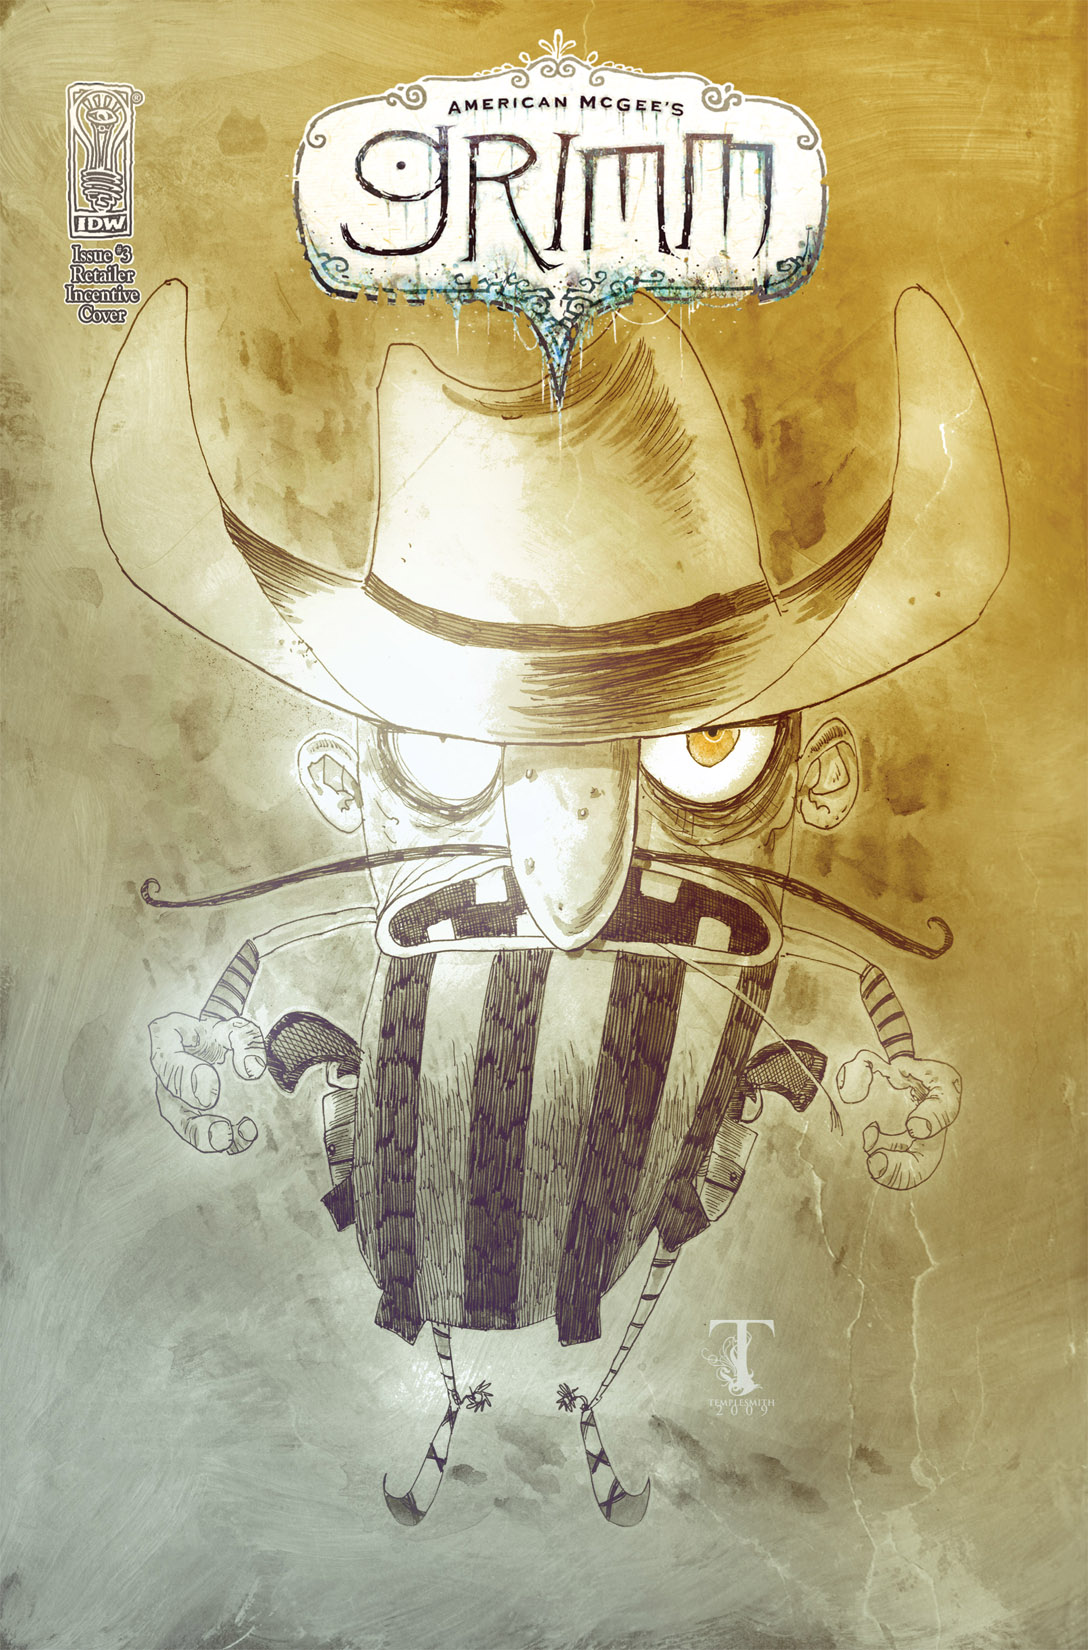 Read online American McGee's Grimm comic -  Issue #3 - 2